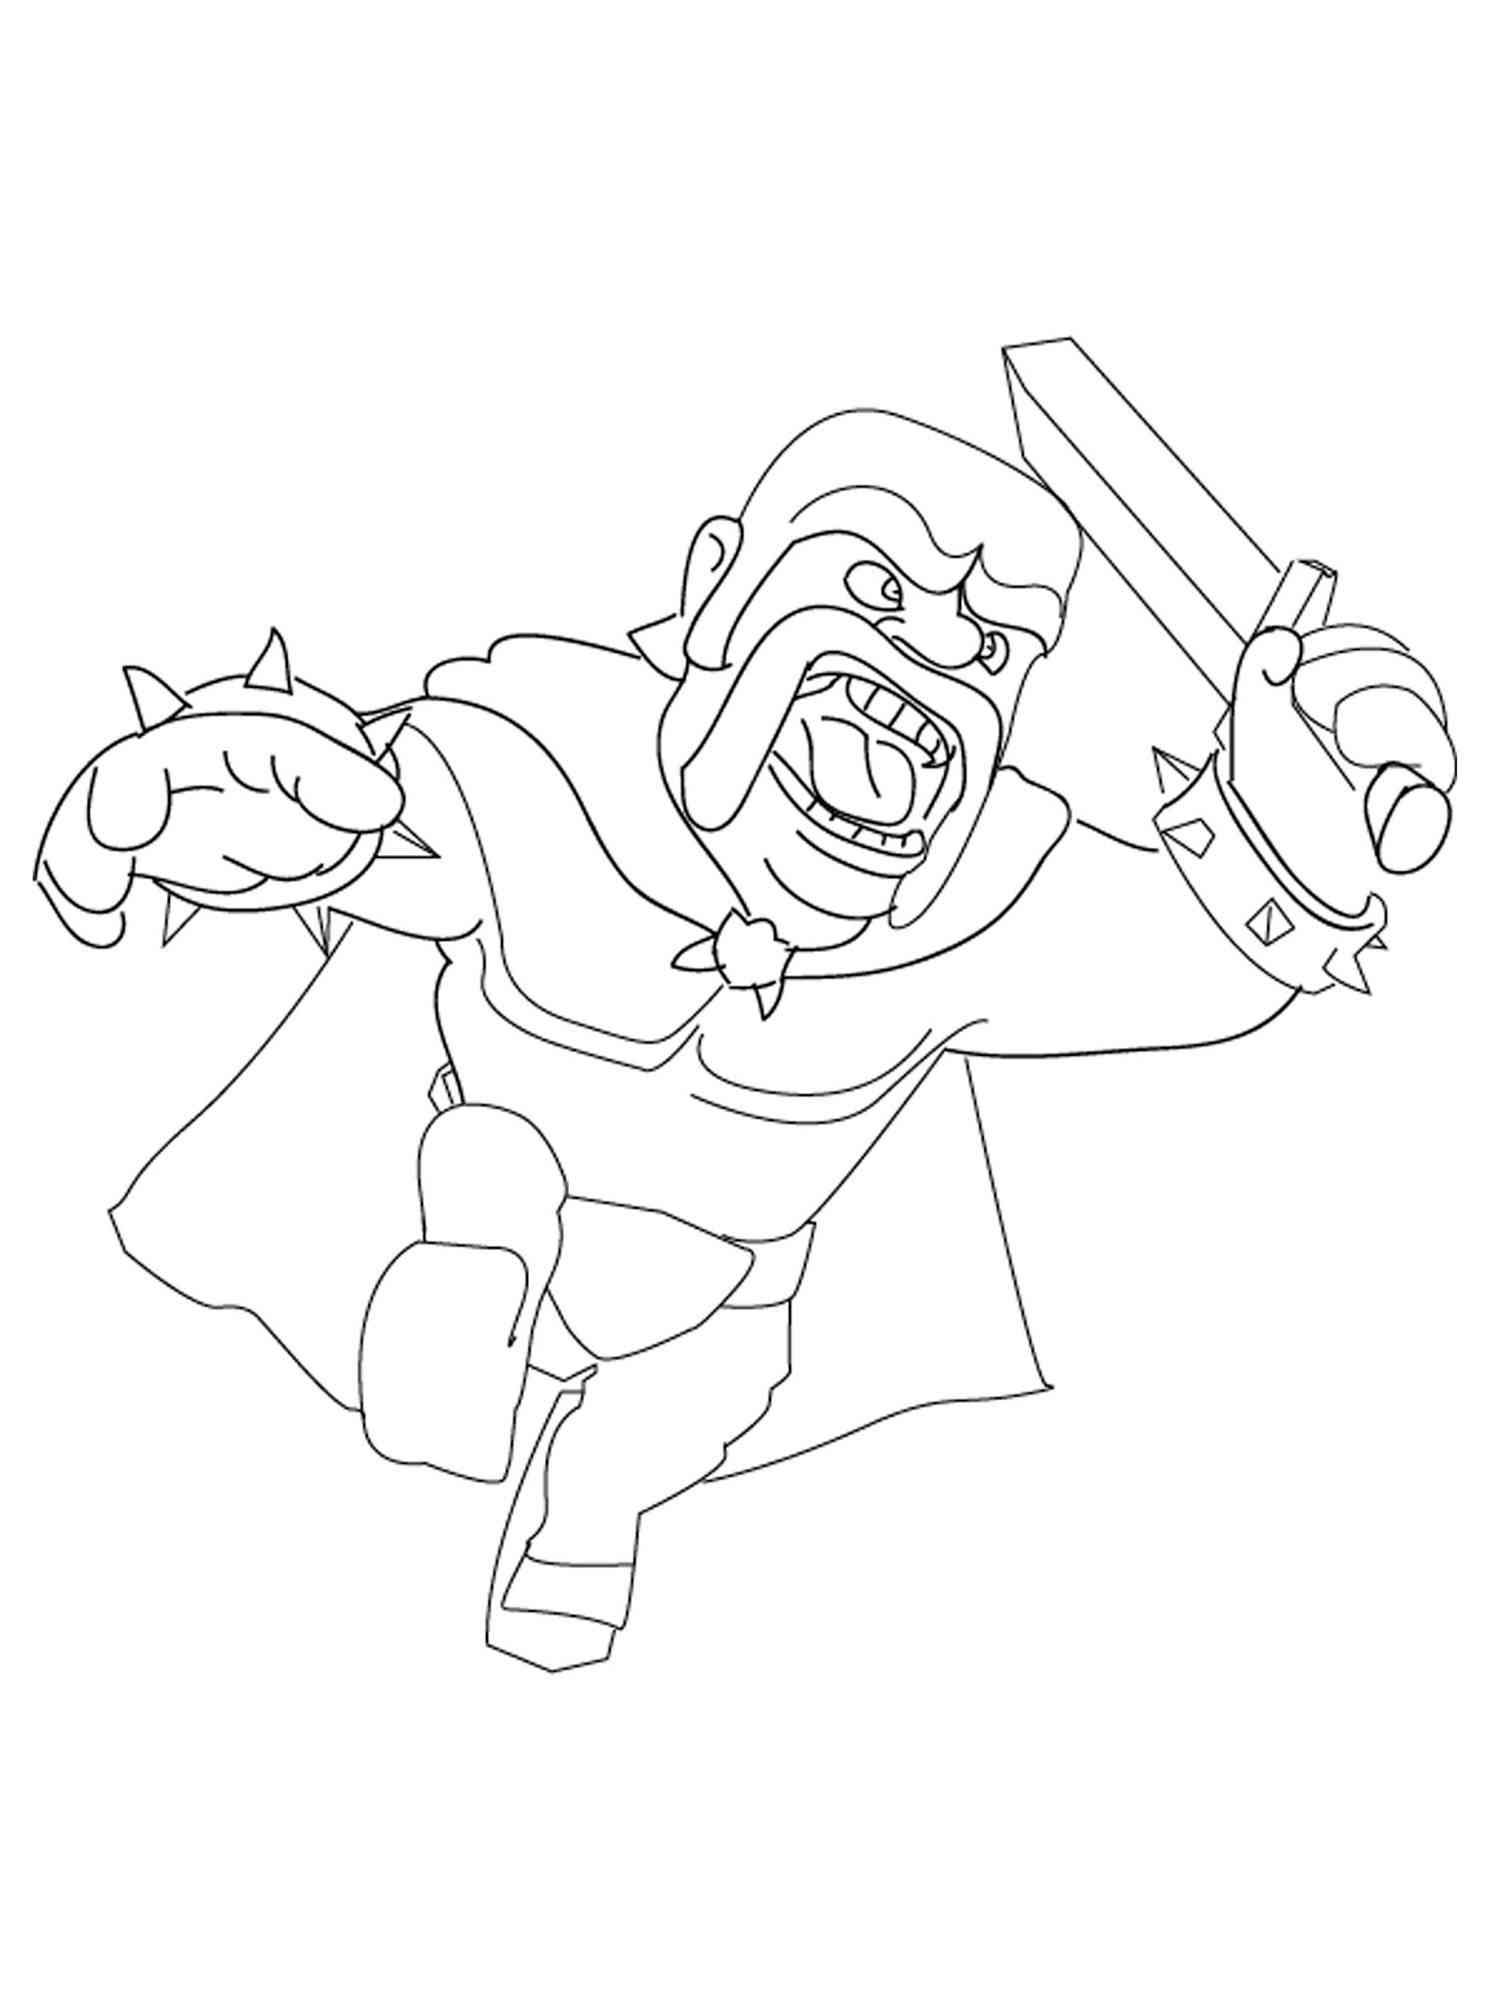 Barbarian with Sword Clash Royale coloring page